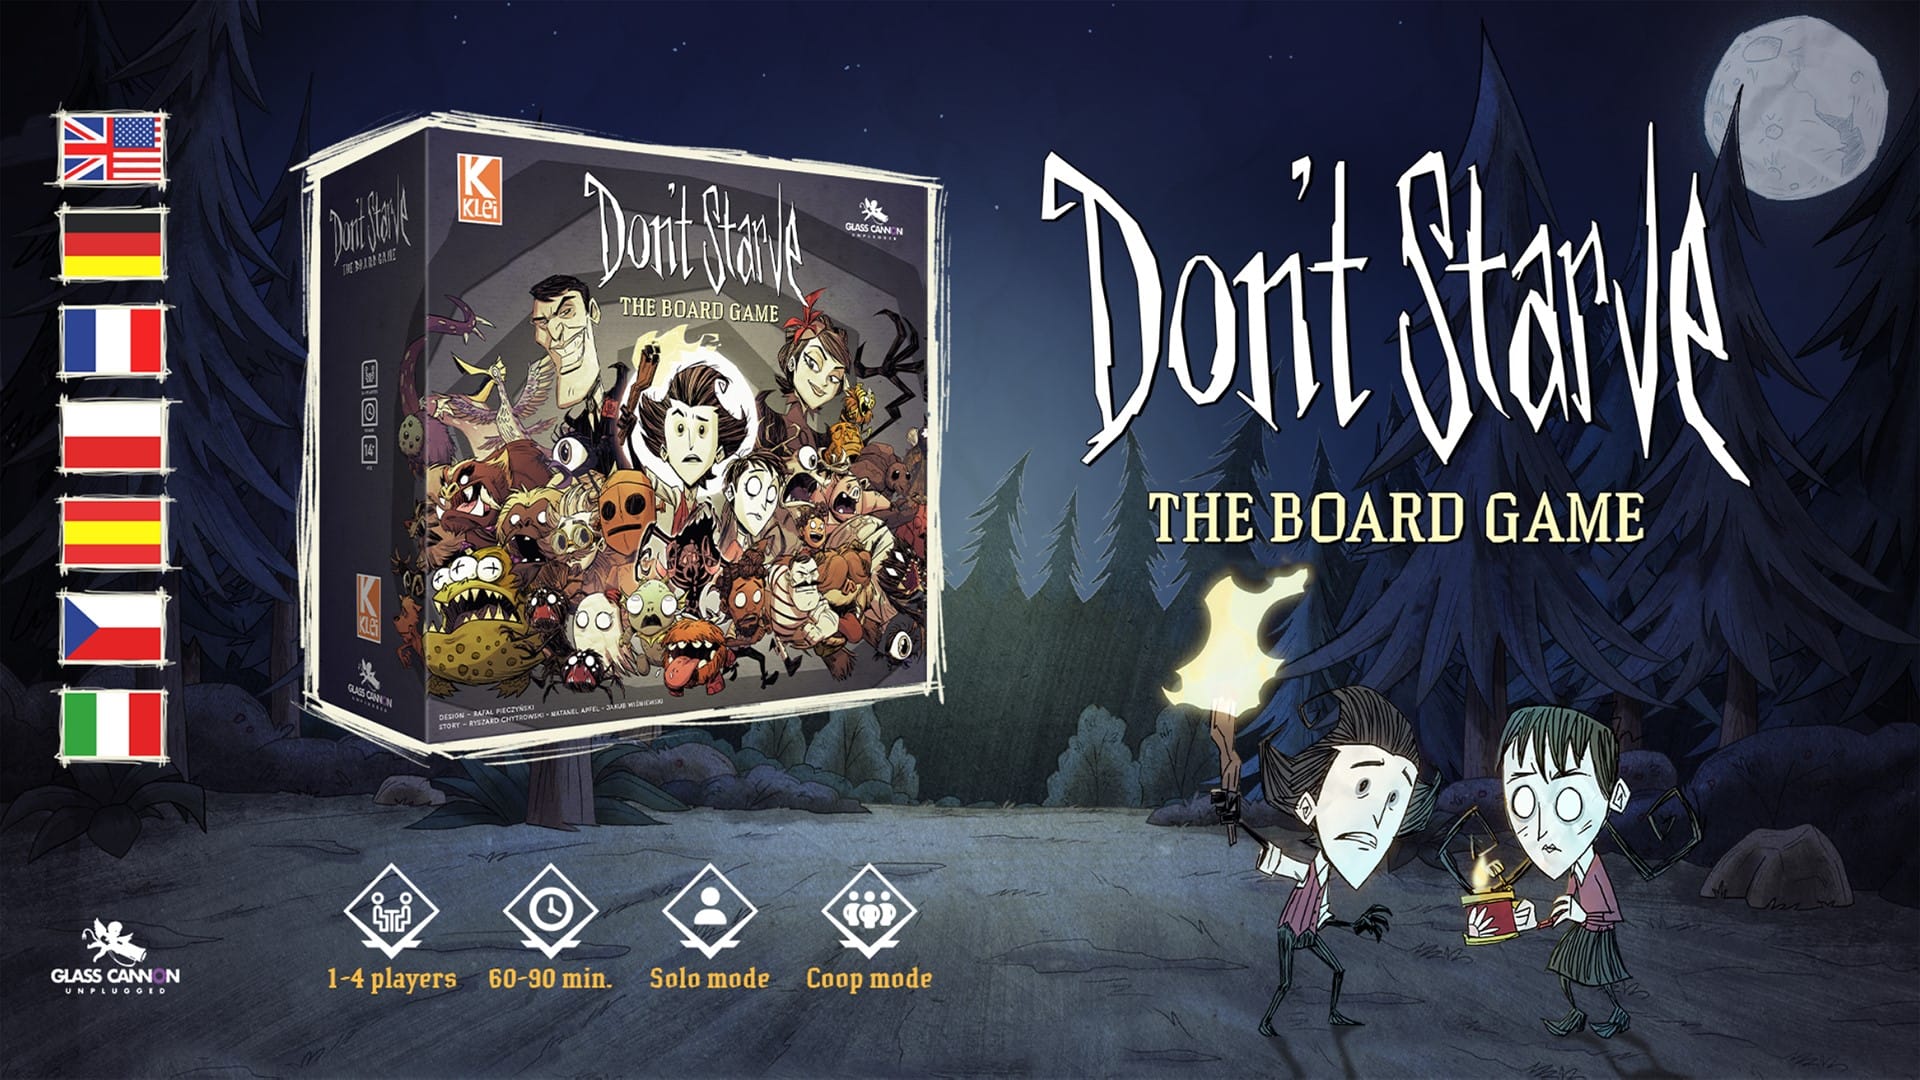 Promotional artwork of Don't Starve: The Board Game, featuring the box, and the male and female protagonists in a dark spooky forest.